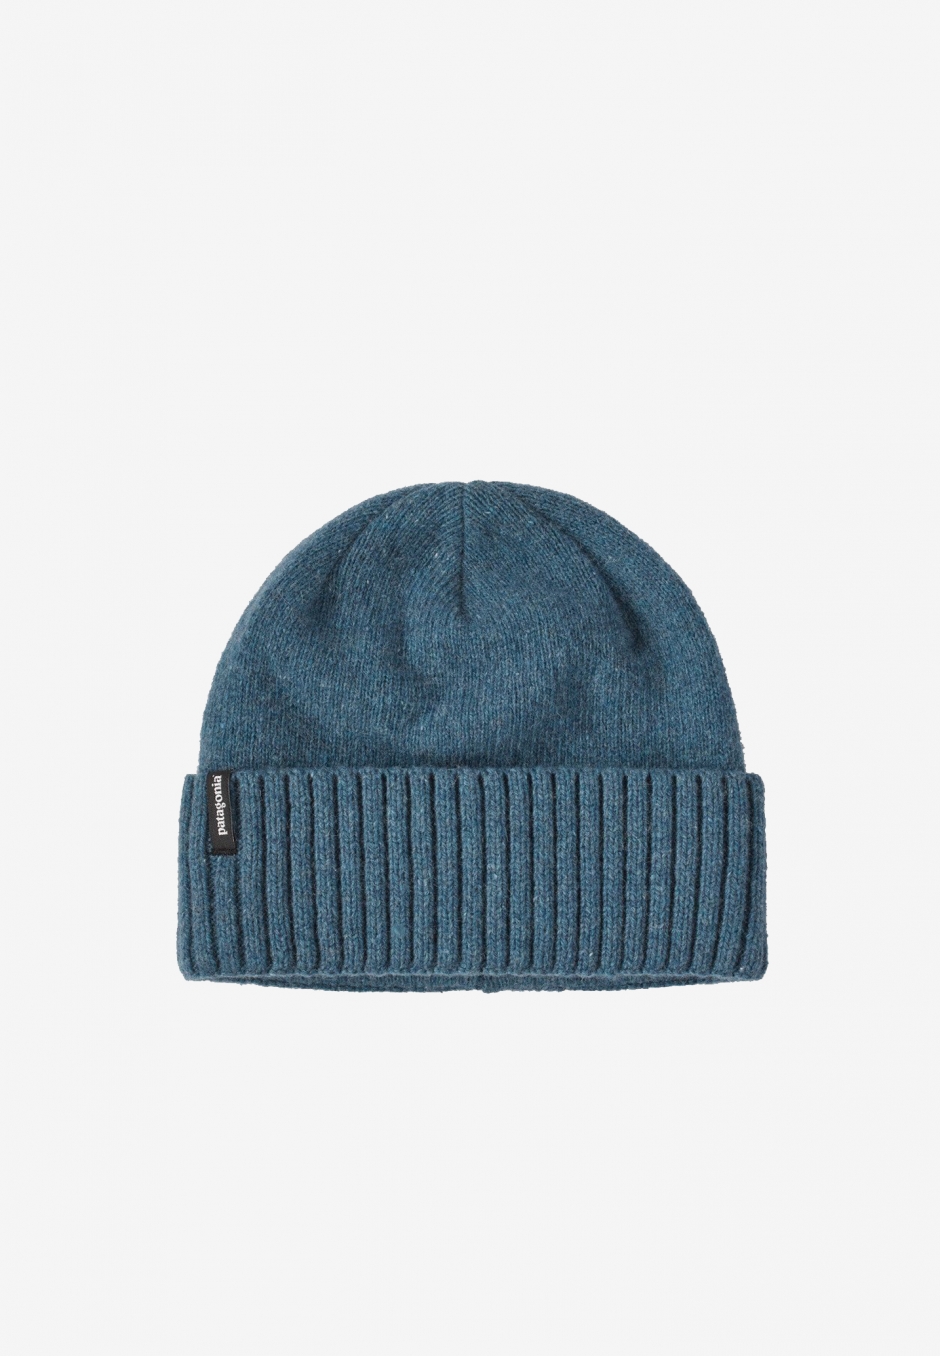 Patagonia Brodeo Beanie Abalone Blue